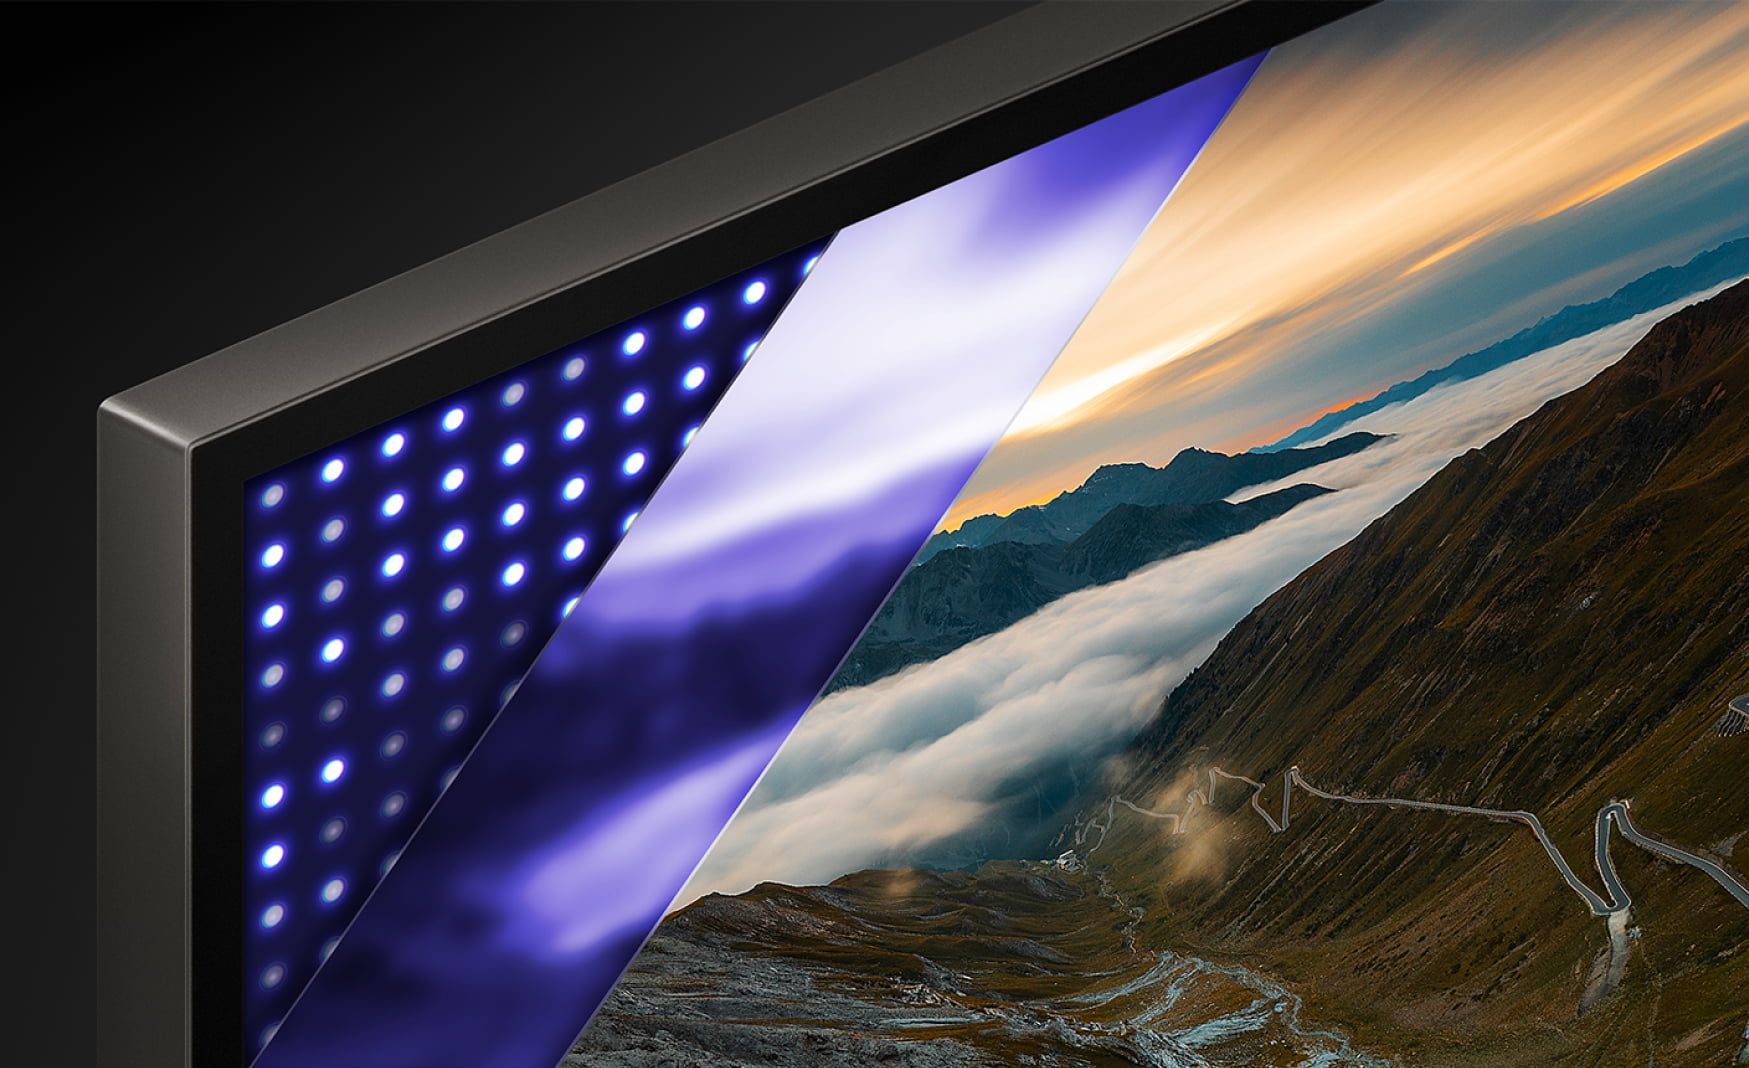 a picture of a mountain with clouds on it showing the spectacular contrast of the backlight master drive on a sony mini led tv